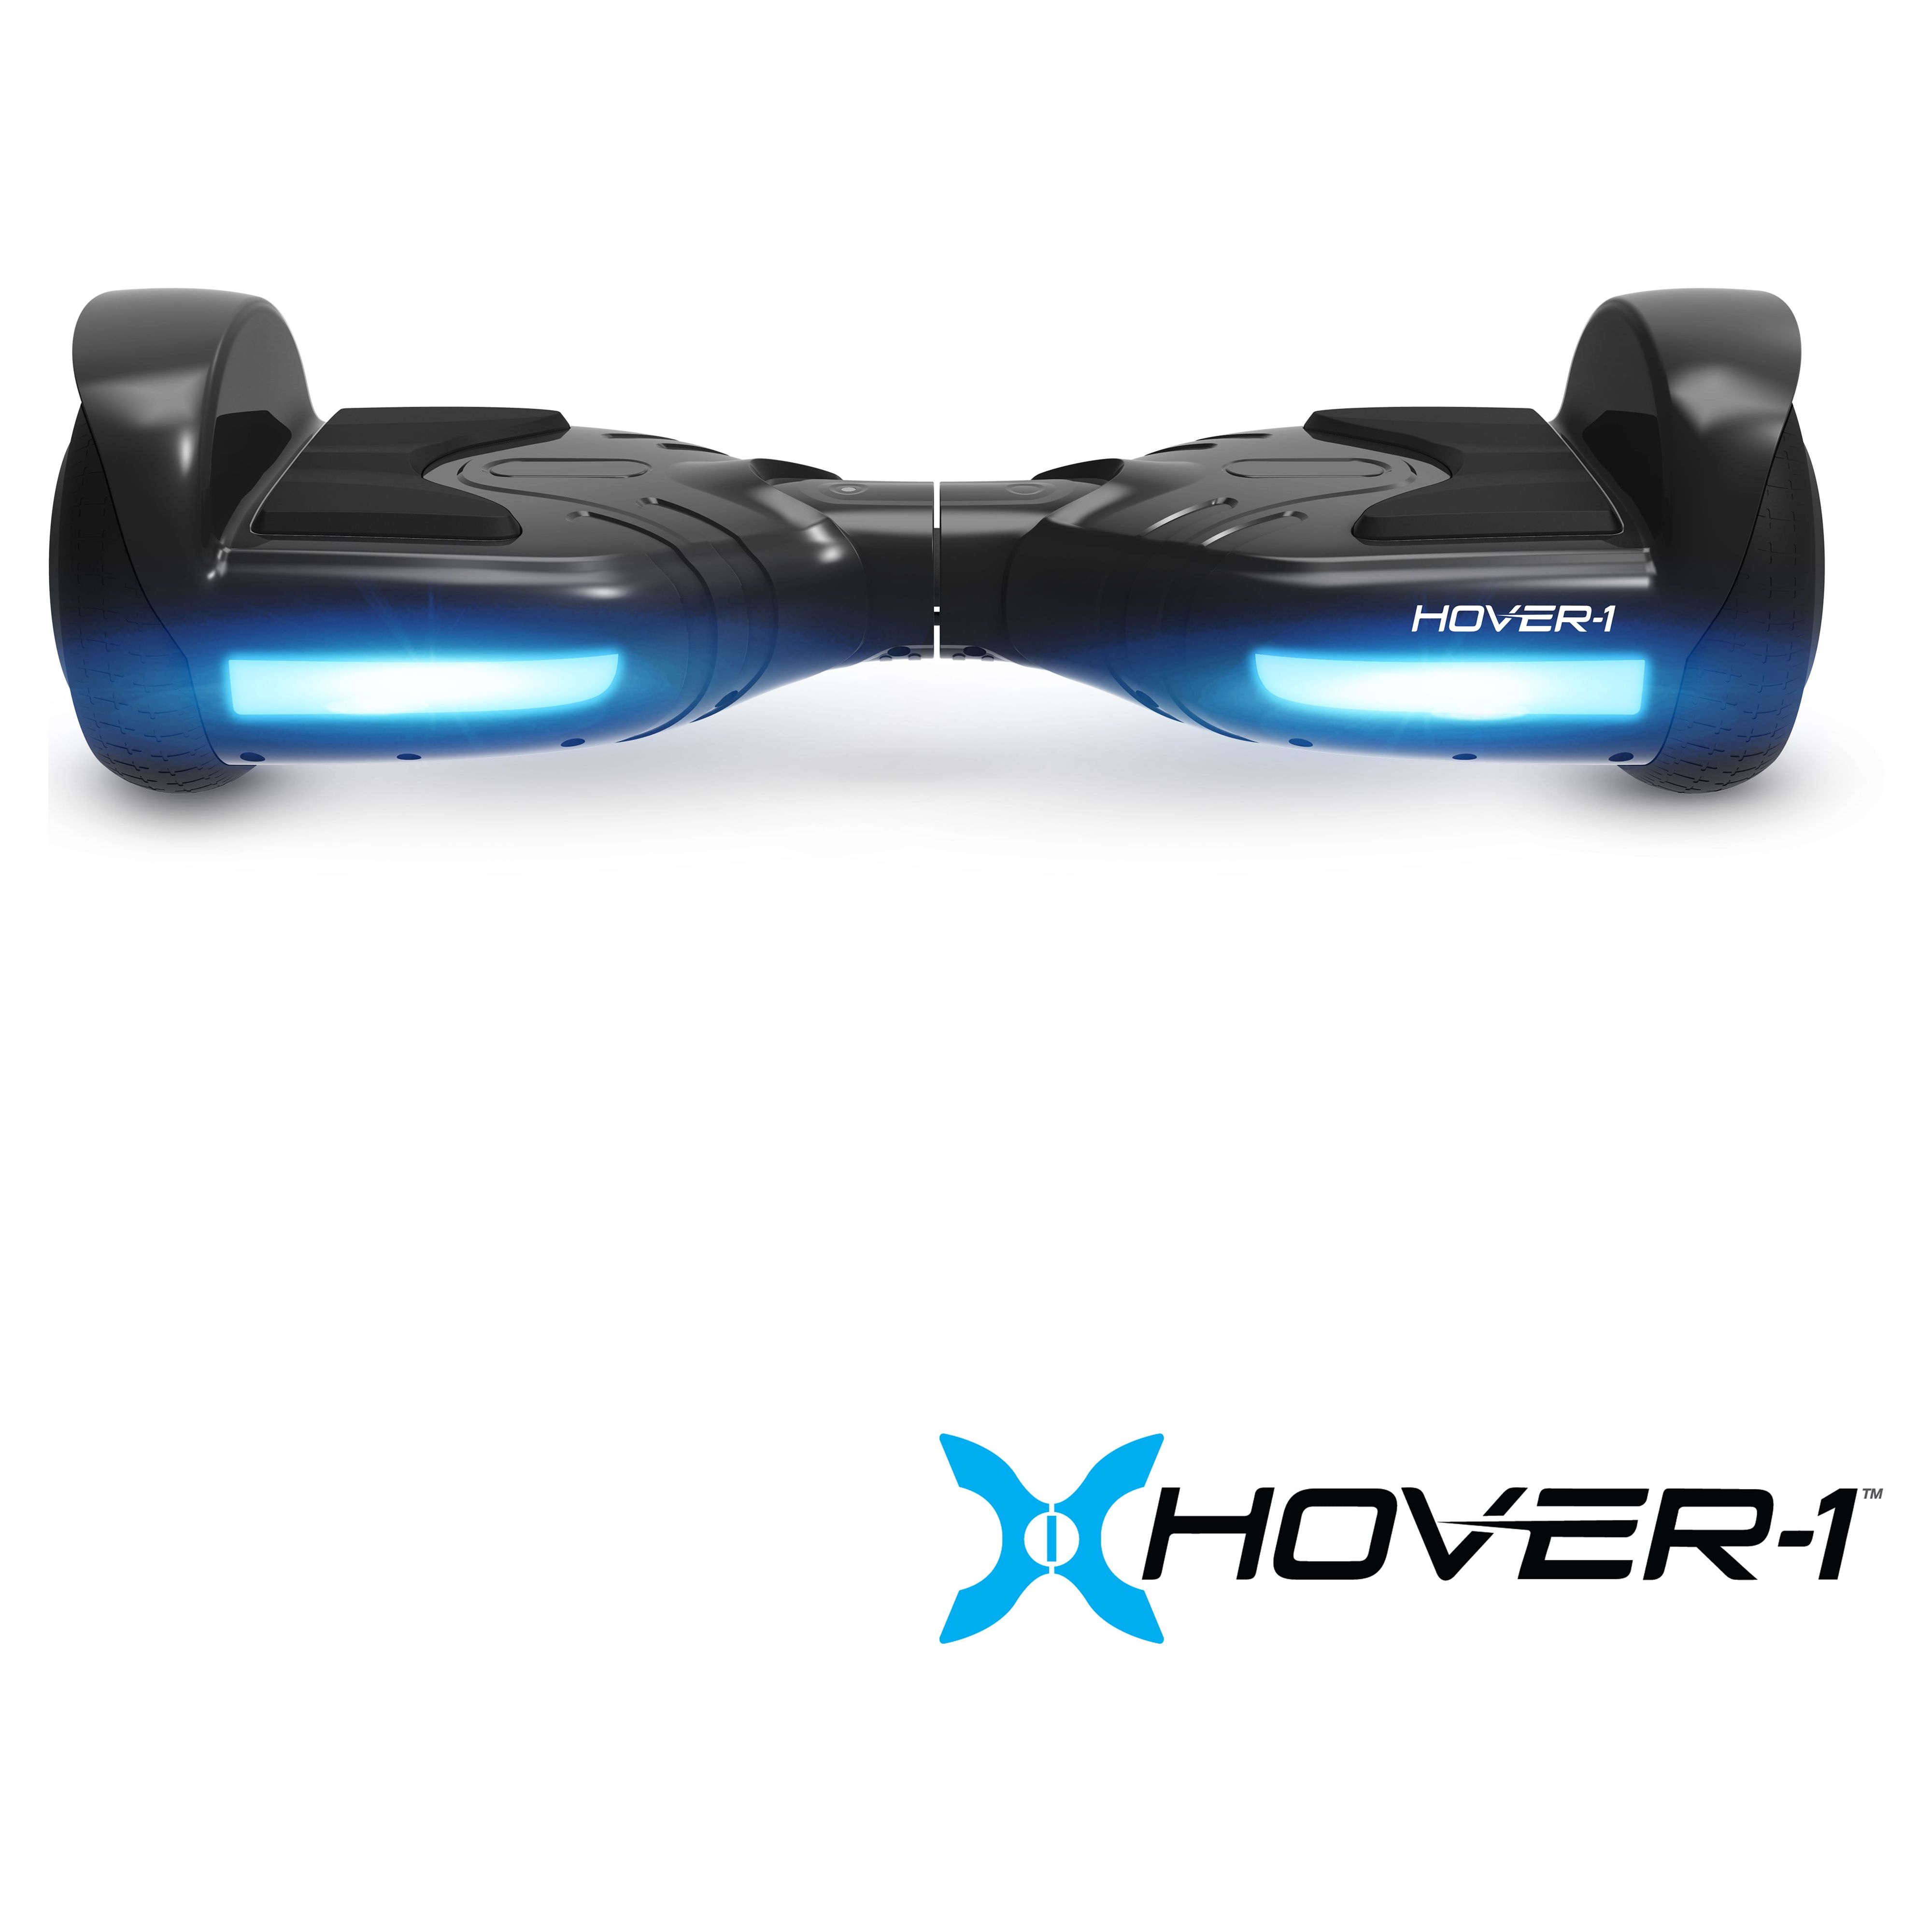 Hover-1 Nova Hoverboard Max Distance 6 Miles - image 1 of 11